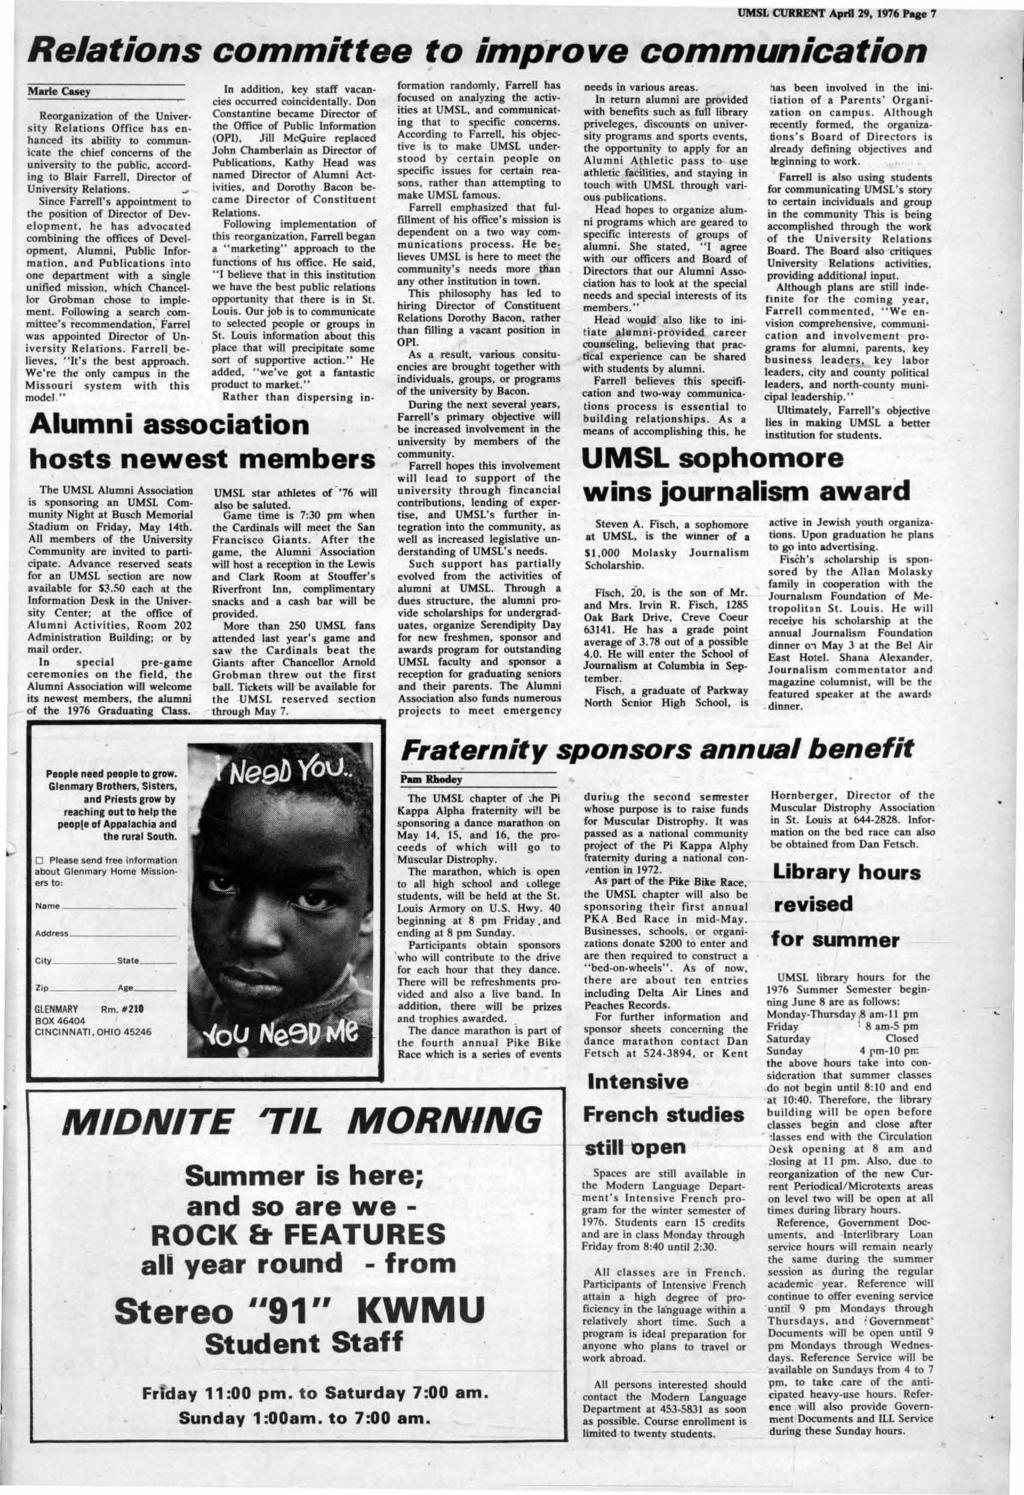 UMSL CUIUlENT April 29, 1976 Paae 7 Relations committee to improve communication Marie Casey Reorganization of the University Relations Office has enhanced its ability to communicate the chief